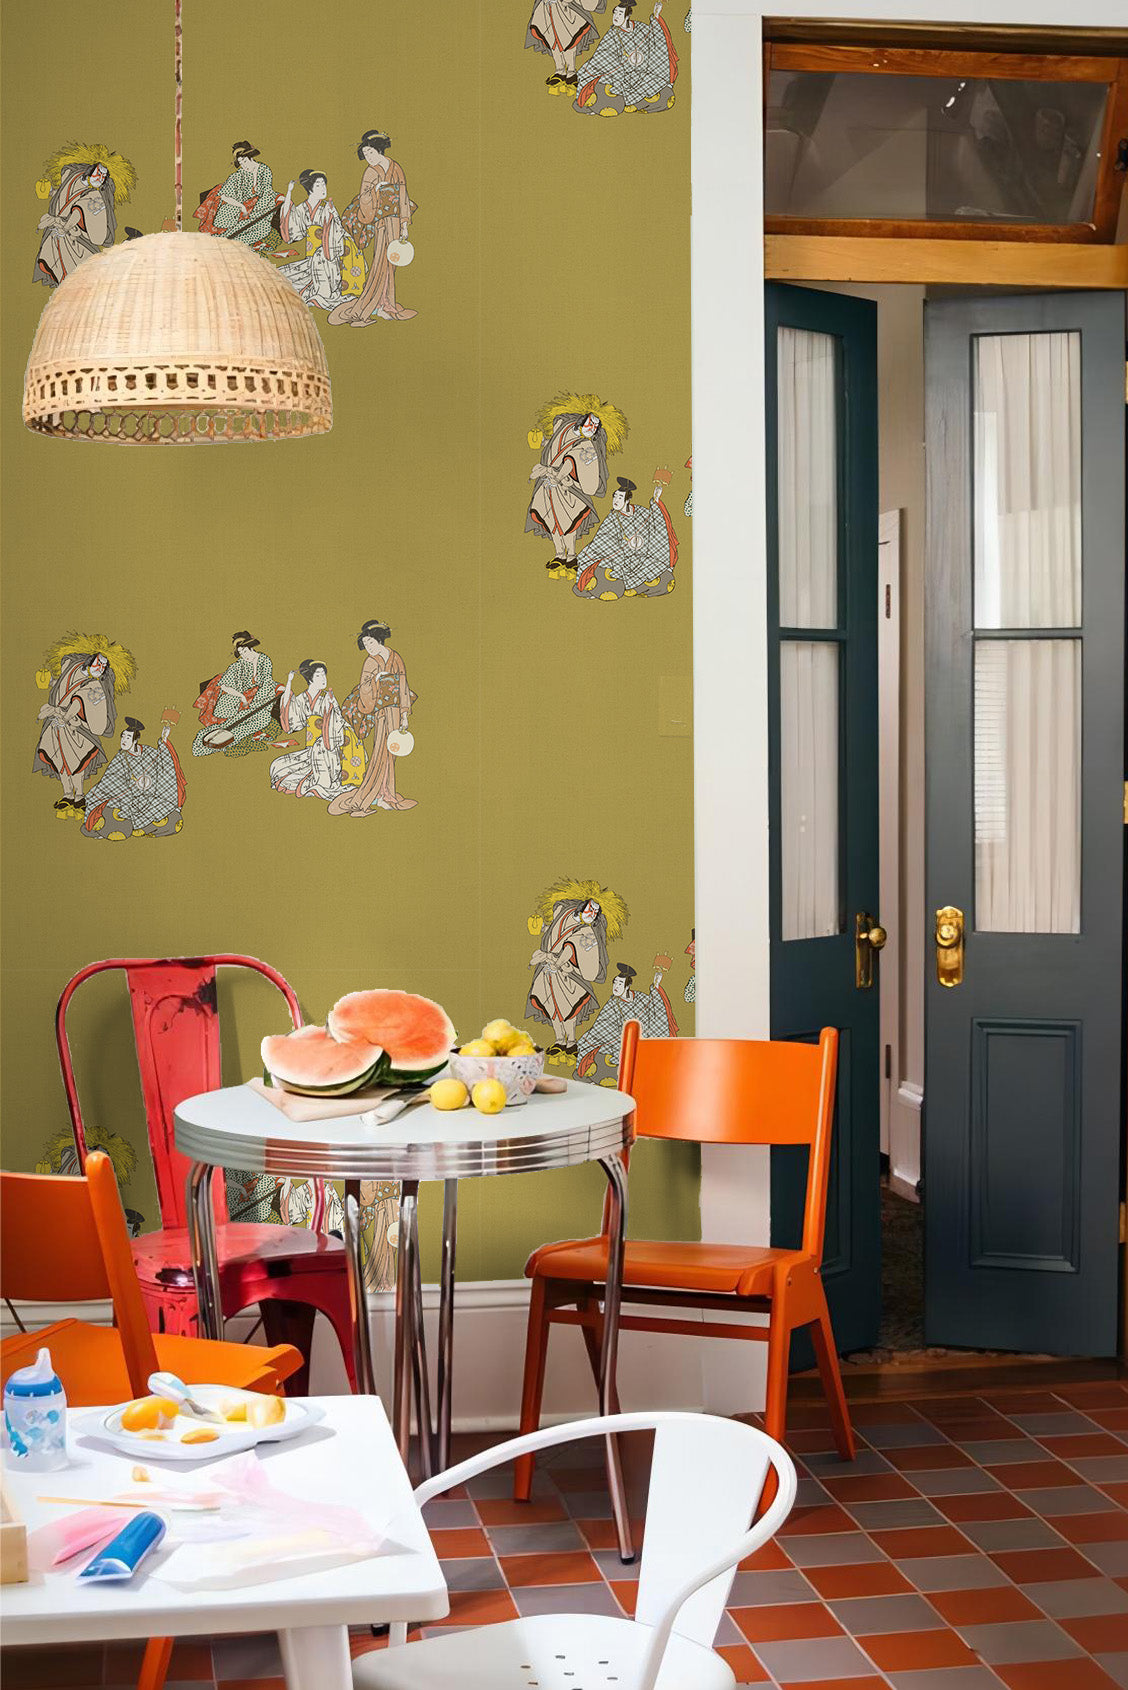 eclectic chilling Kabuki vintage peel and stick wallpaper in the dinning room